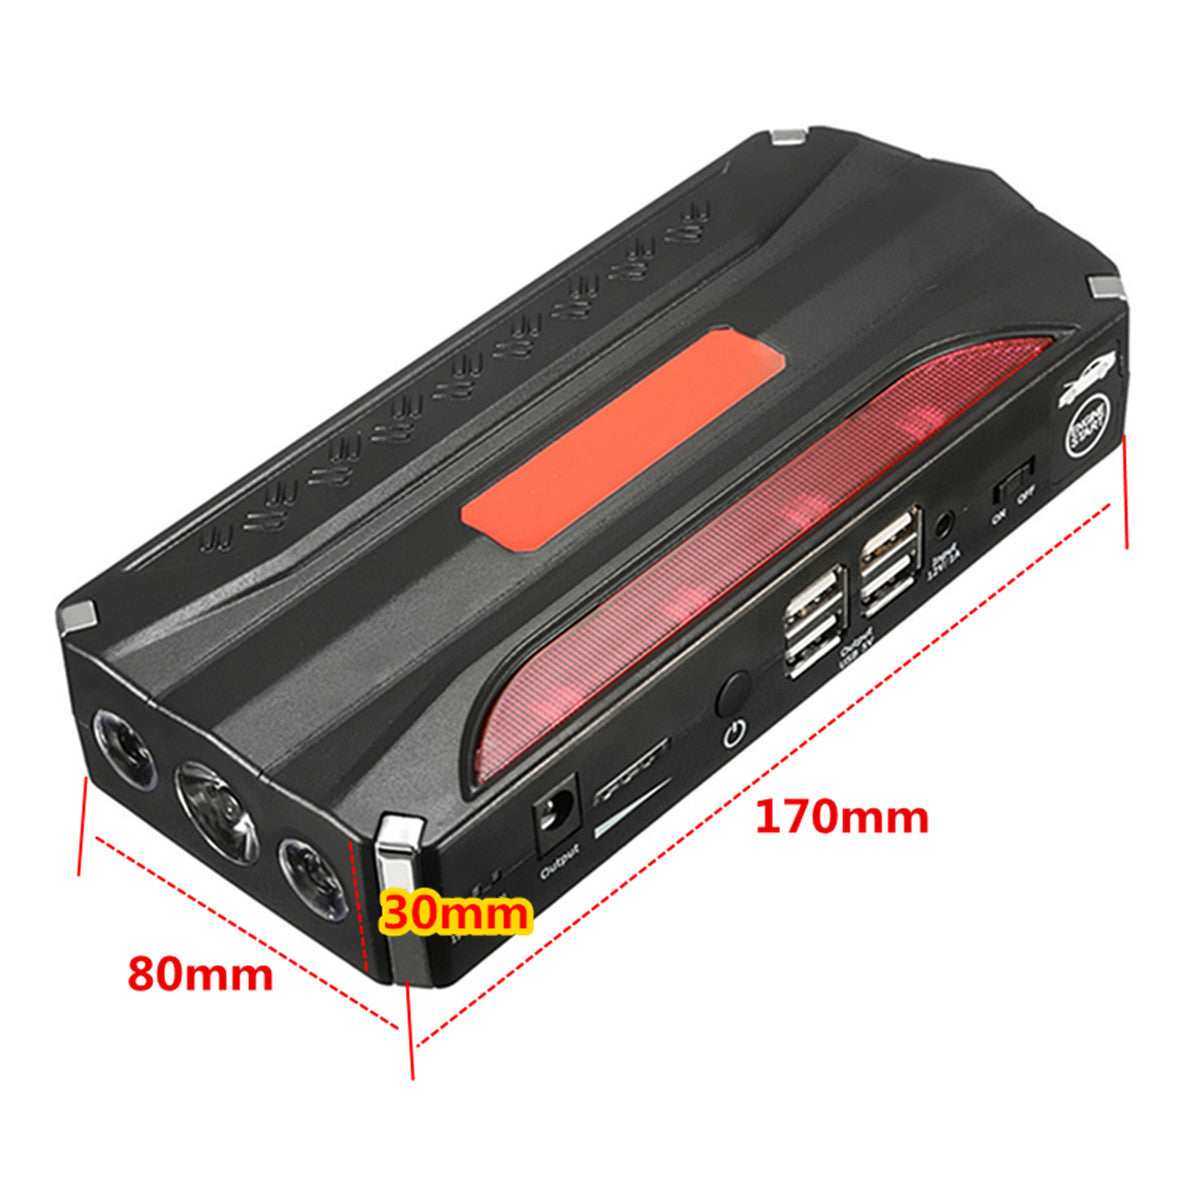 L - Car Jump Starter 68800mAh 4USB Set With Air Compressor Rechargeable Portable Multifunction LED Emergency Battery